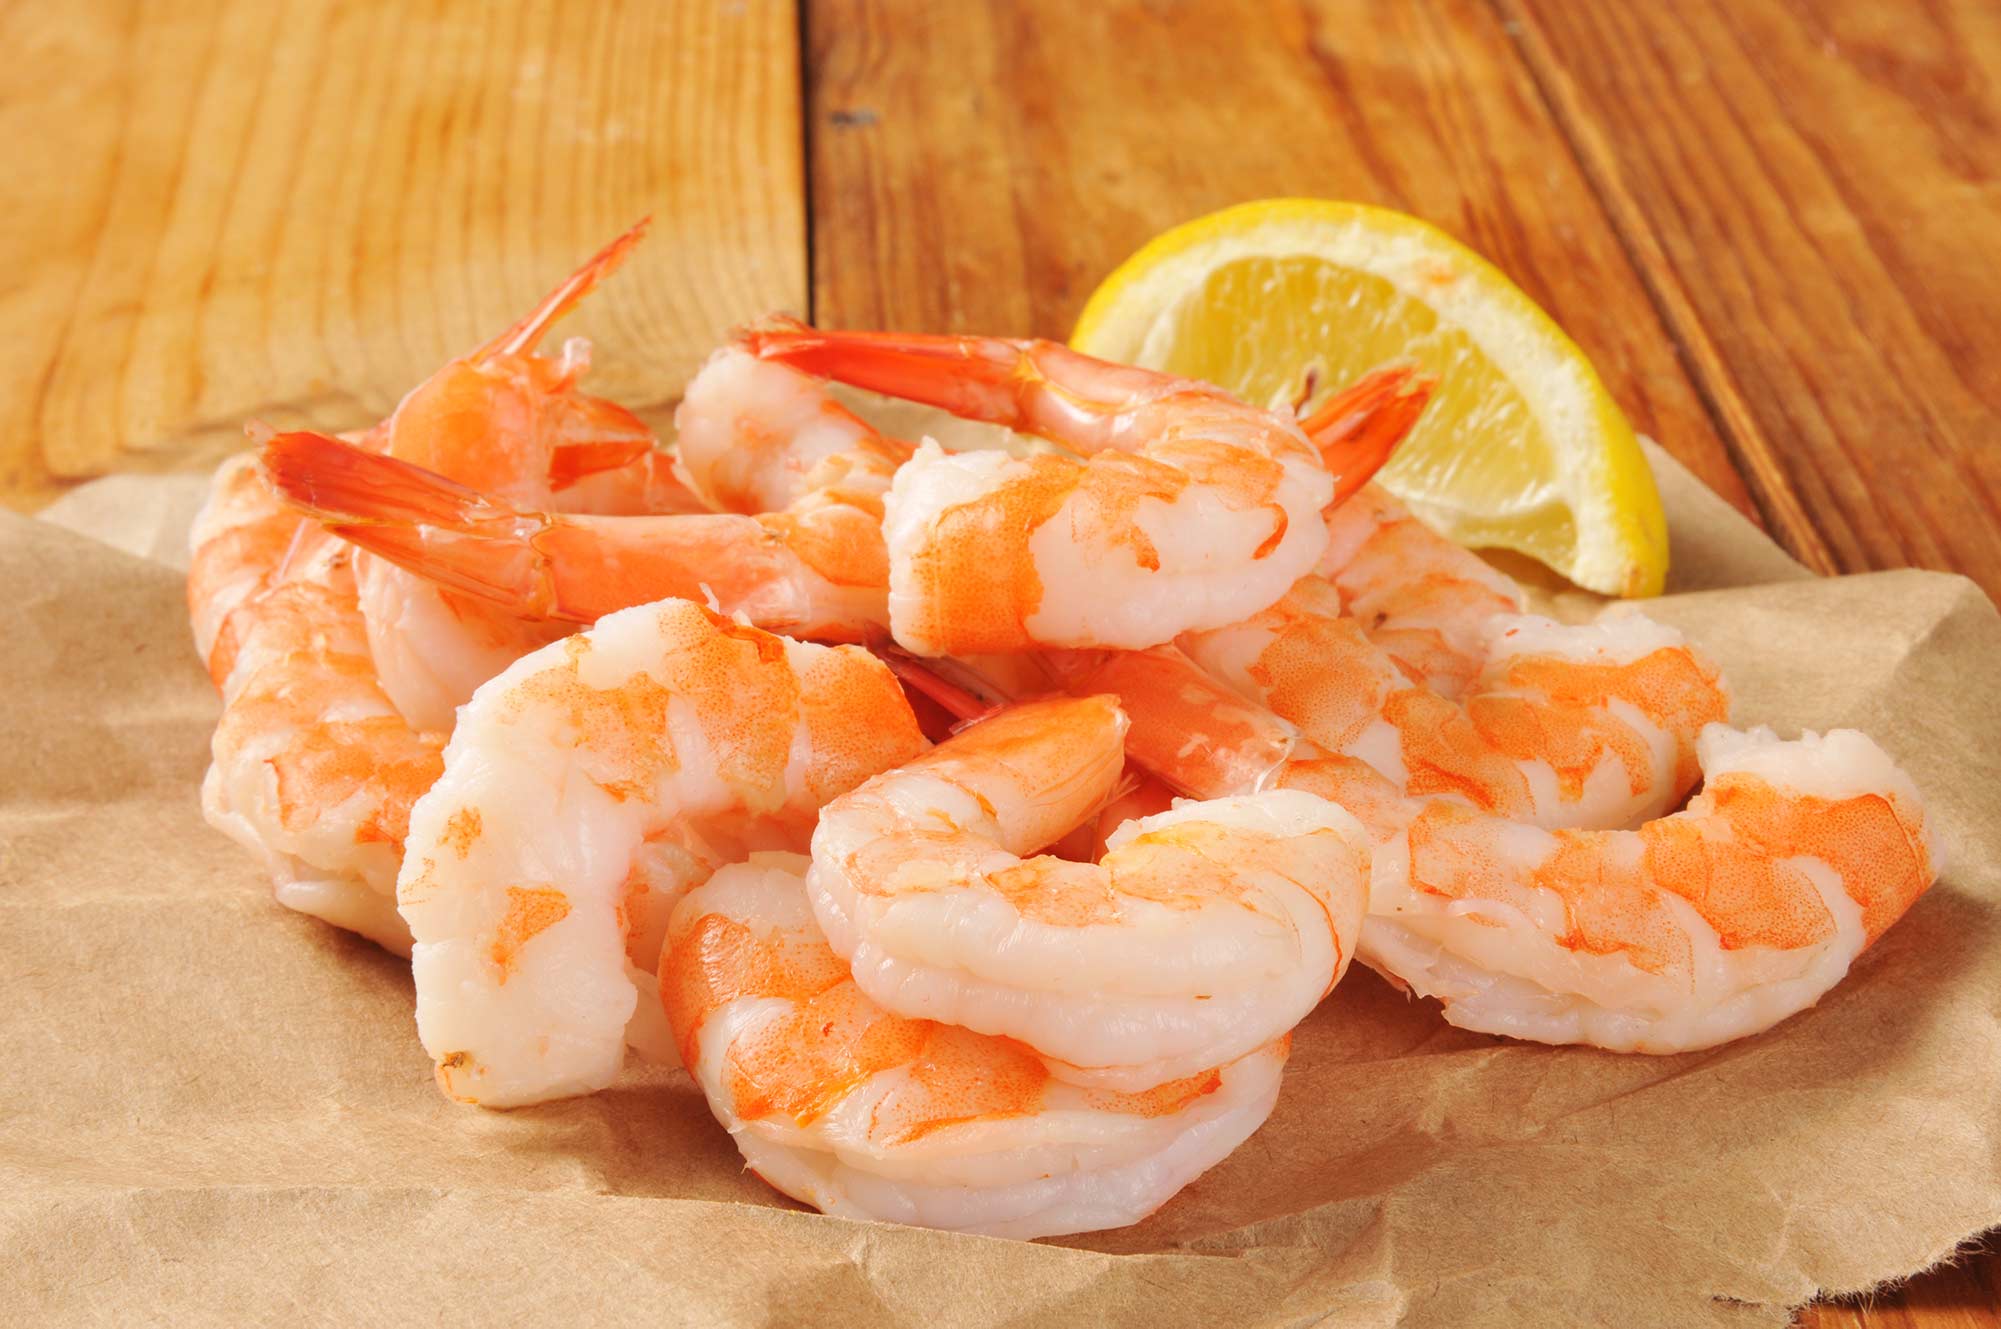 Buy Wild Gulf of Mexico Shrimp Marithyme Seafood Company